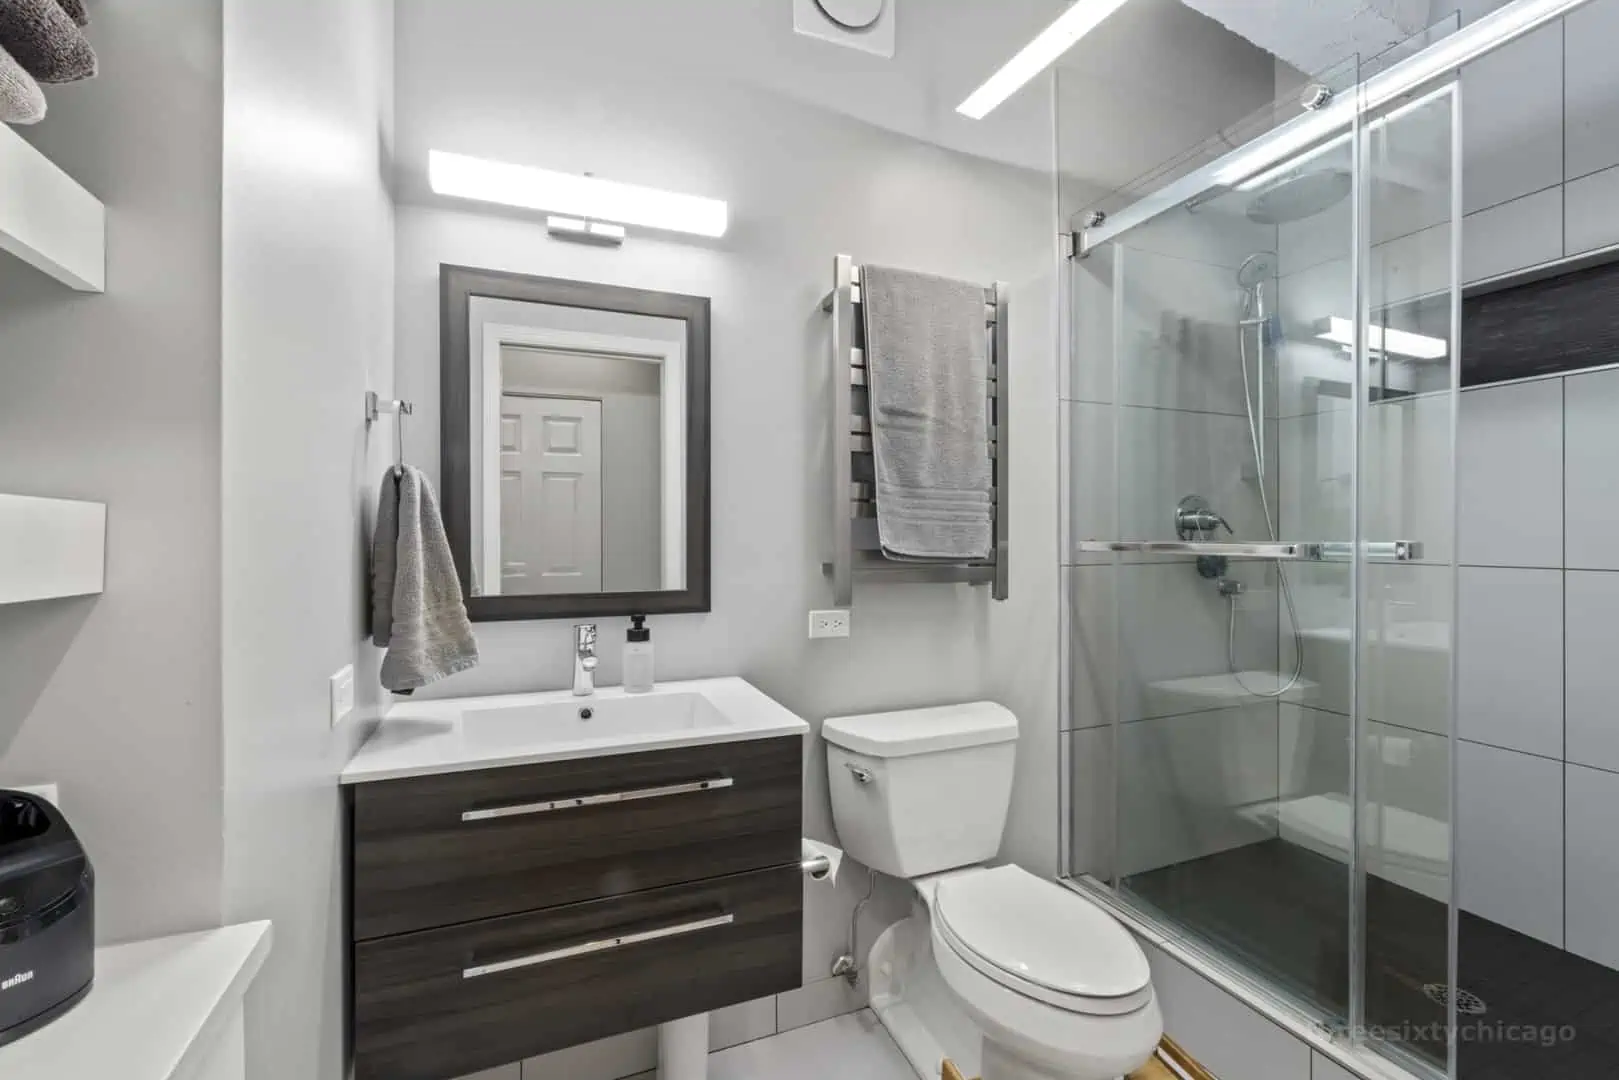 Renovated bathroom - Chicago Condo Improvements That Add The Most Value